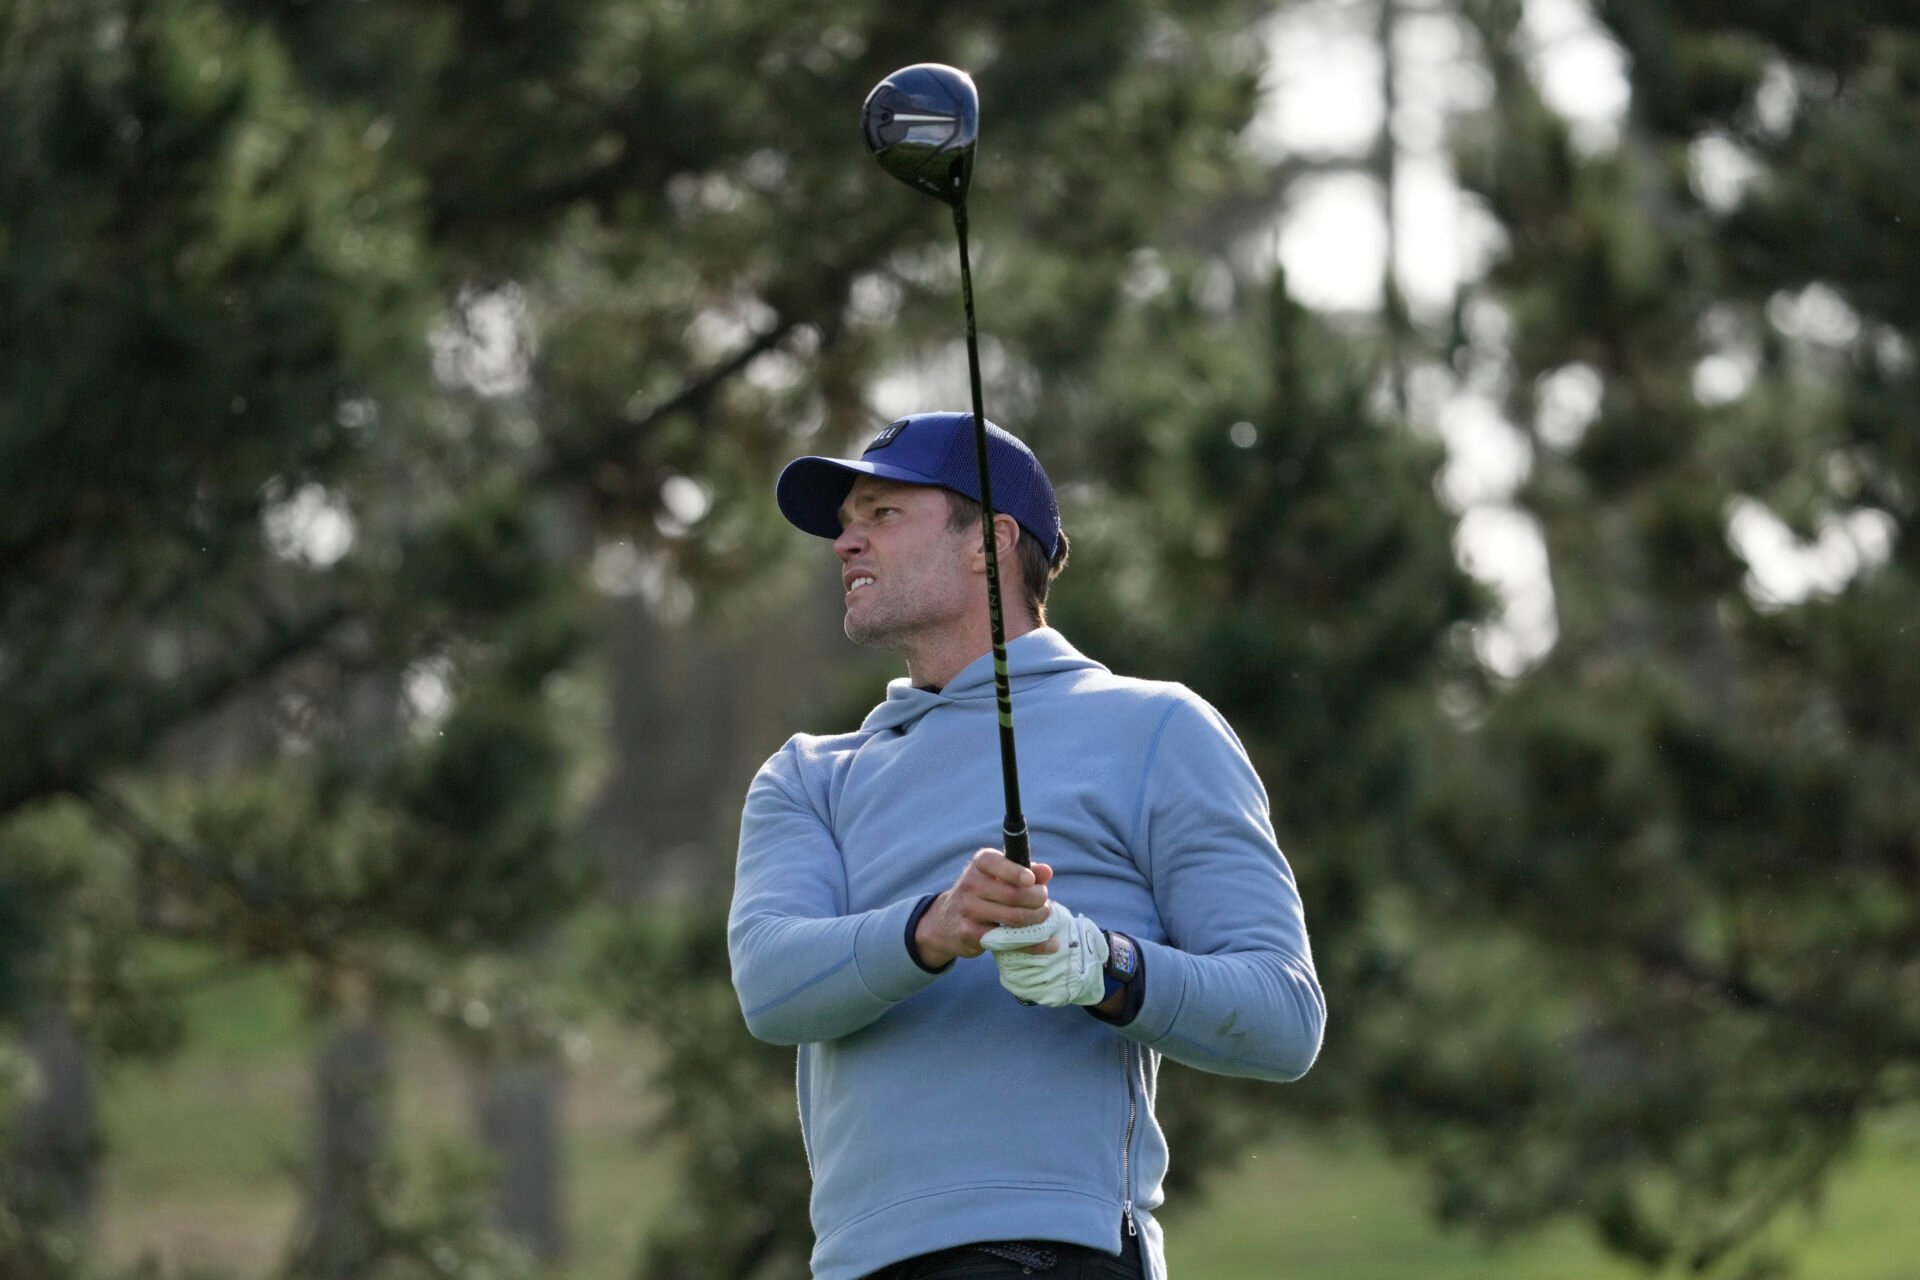 NFL former quarterback Tom Brady hits his tee shot on the 11th hole during the first round of the AT&T Pebble Beach Pro-Am golf tournament at Spyglass Hill Golf Course.